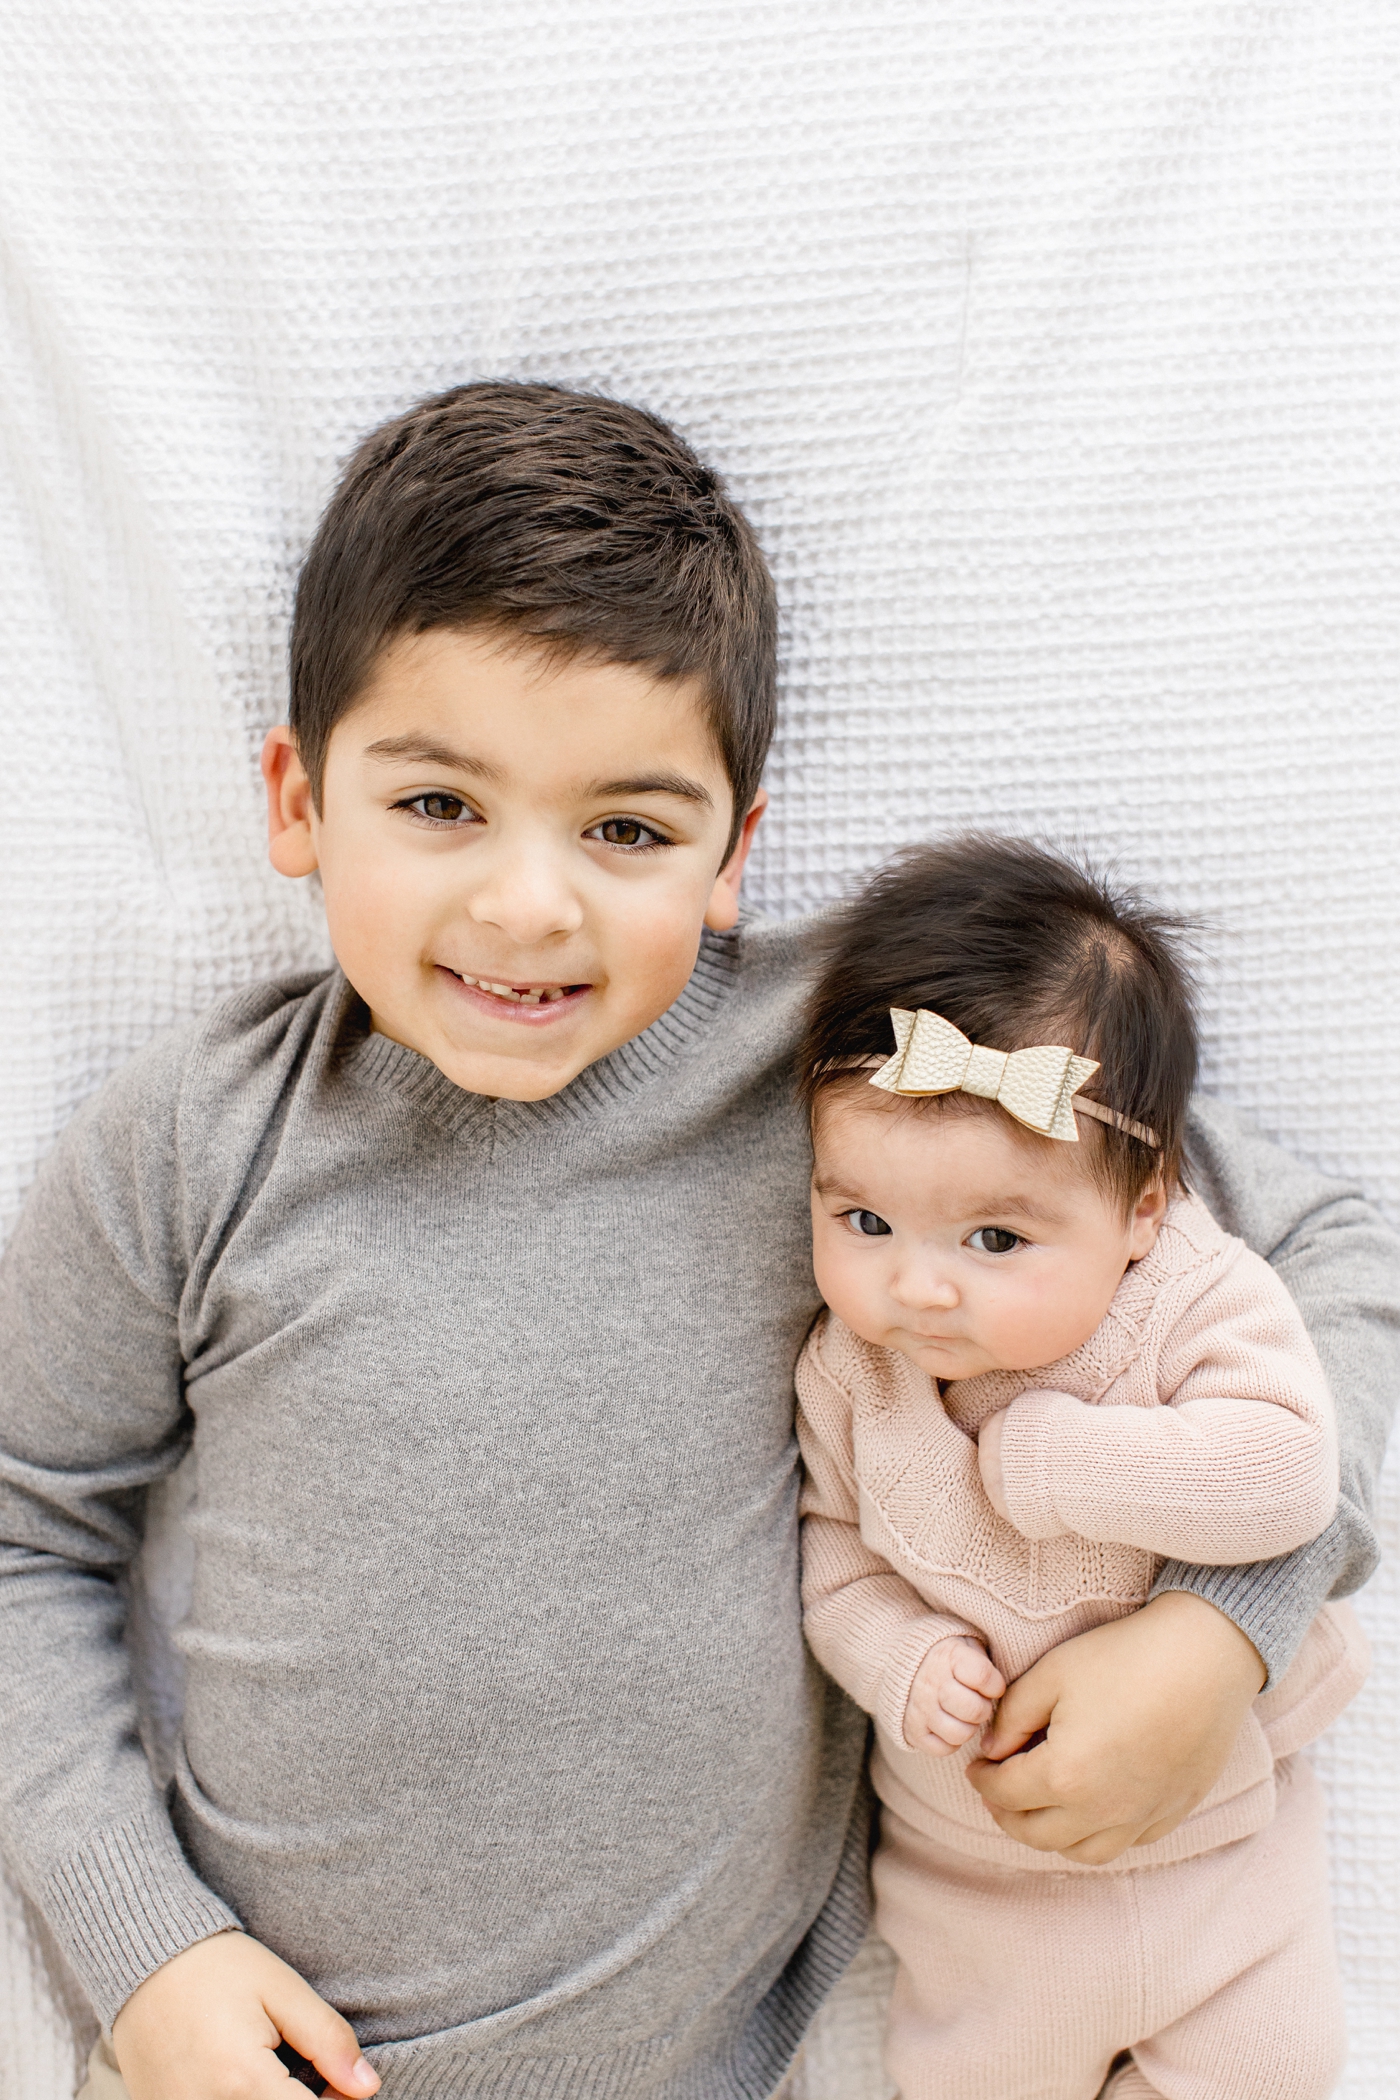 Big brother smiling with baby sister in his arms. Photo by Sana Ahmed Photography.